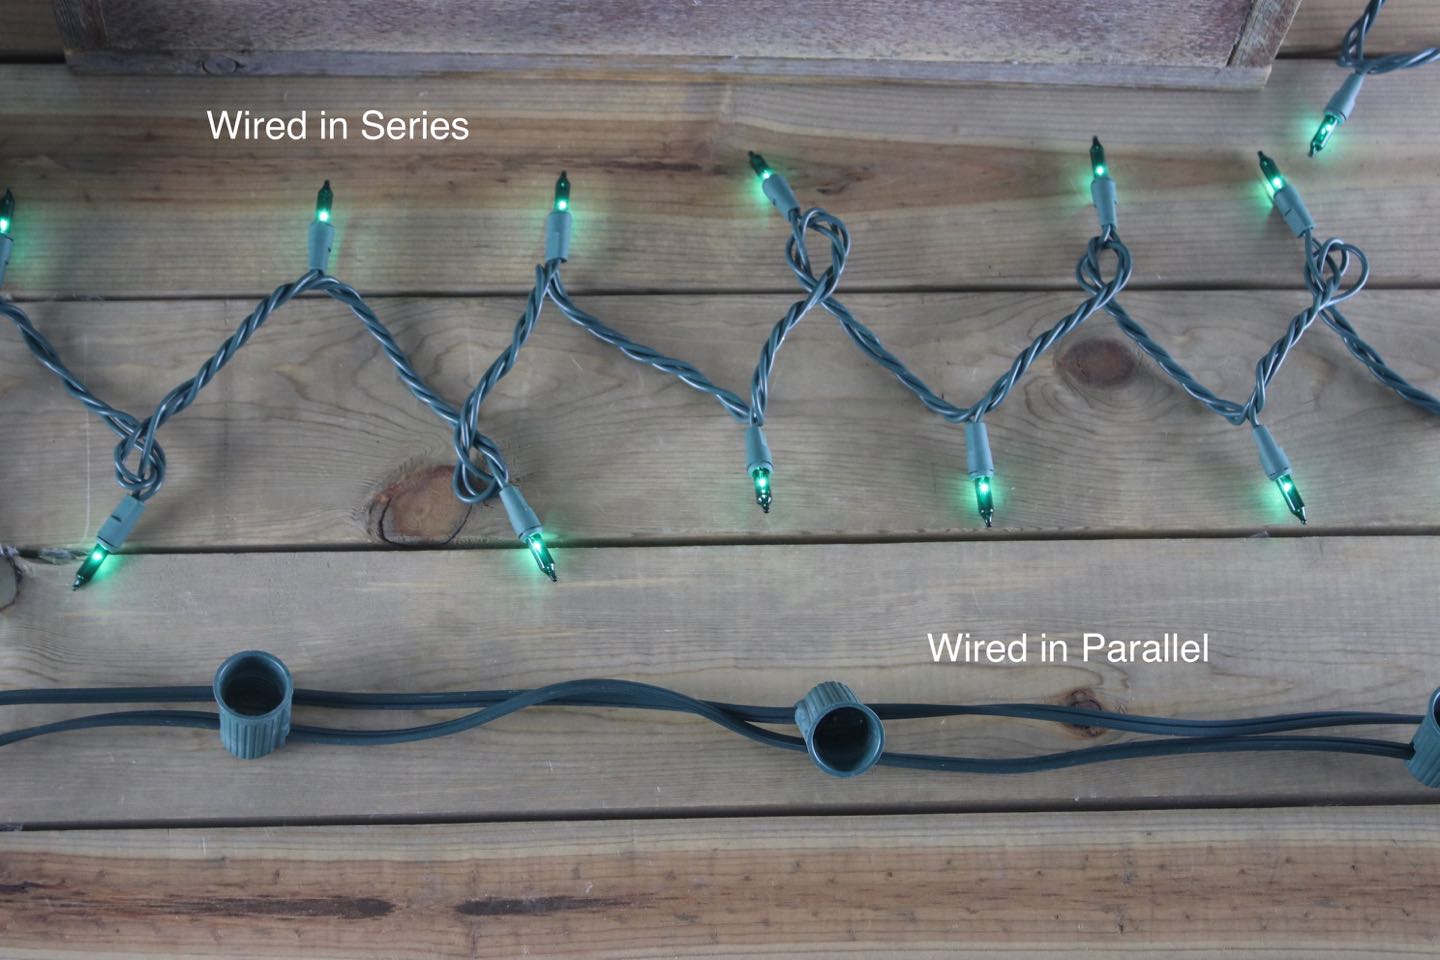 Are Christmas lights in series or parallel?